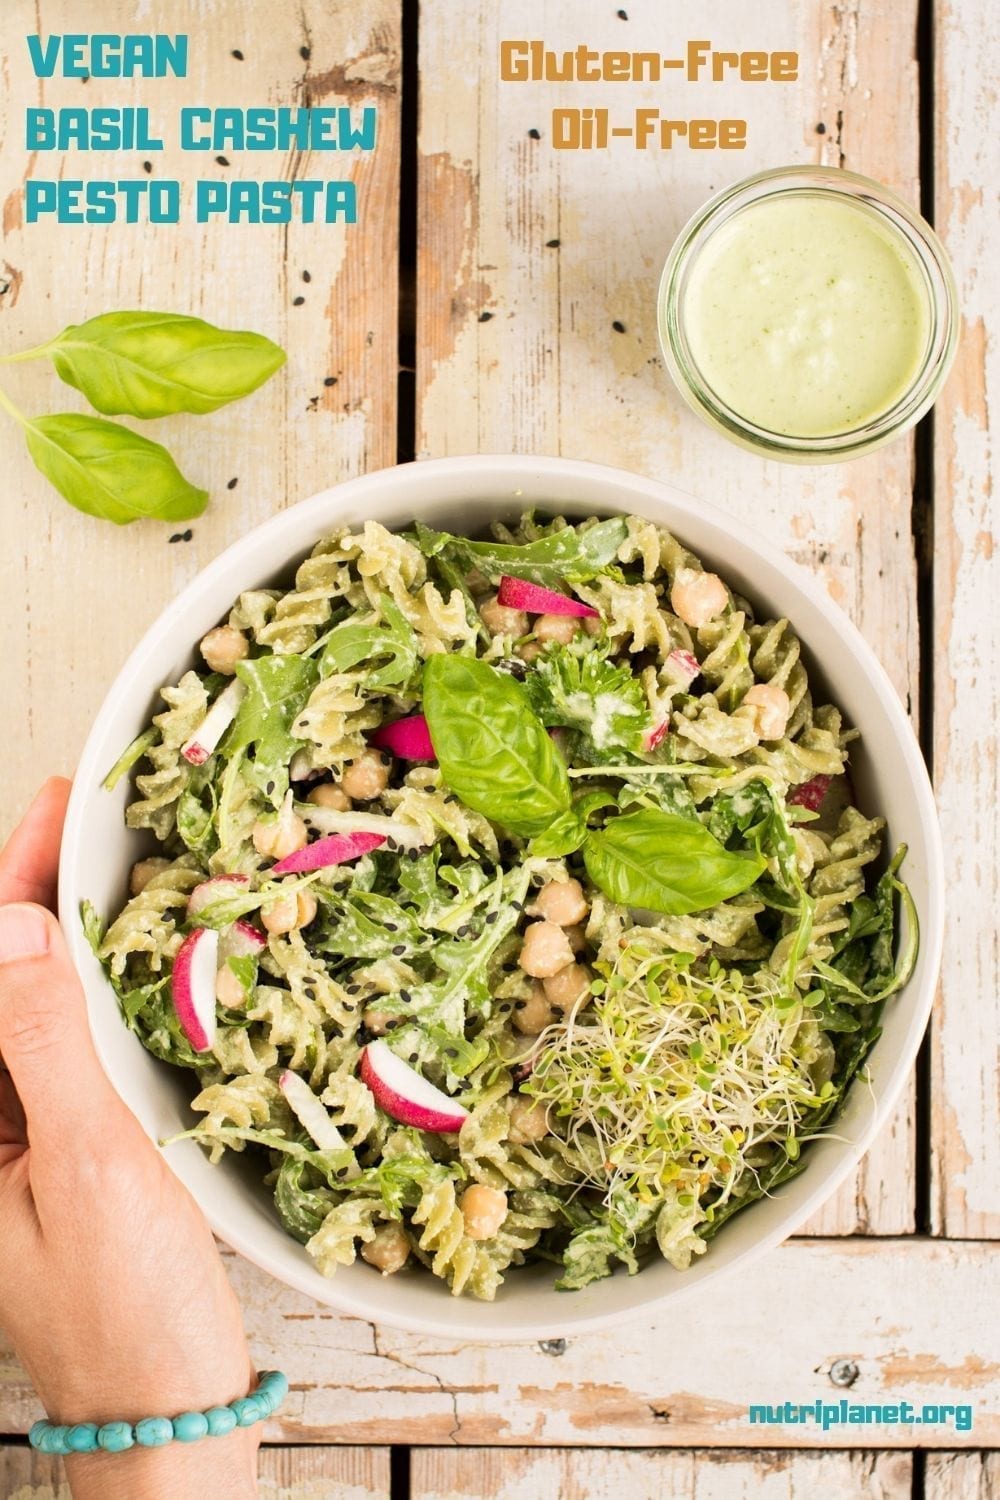 Super easy vegan basil cashew pesto pasta recipe that only requires 10 minutes of your time.